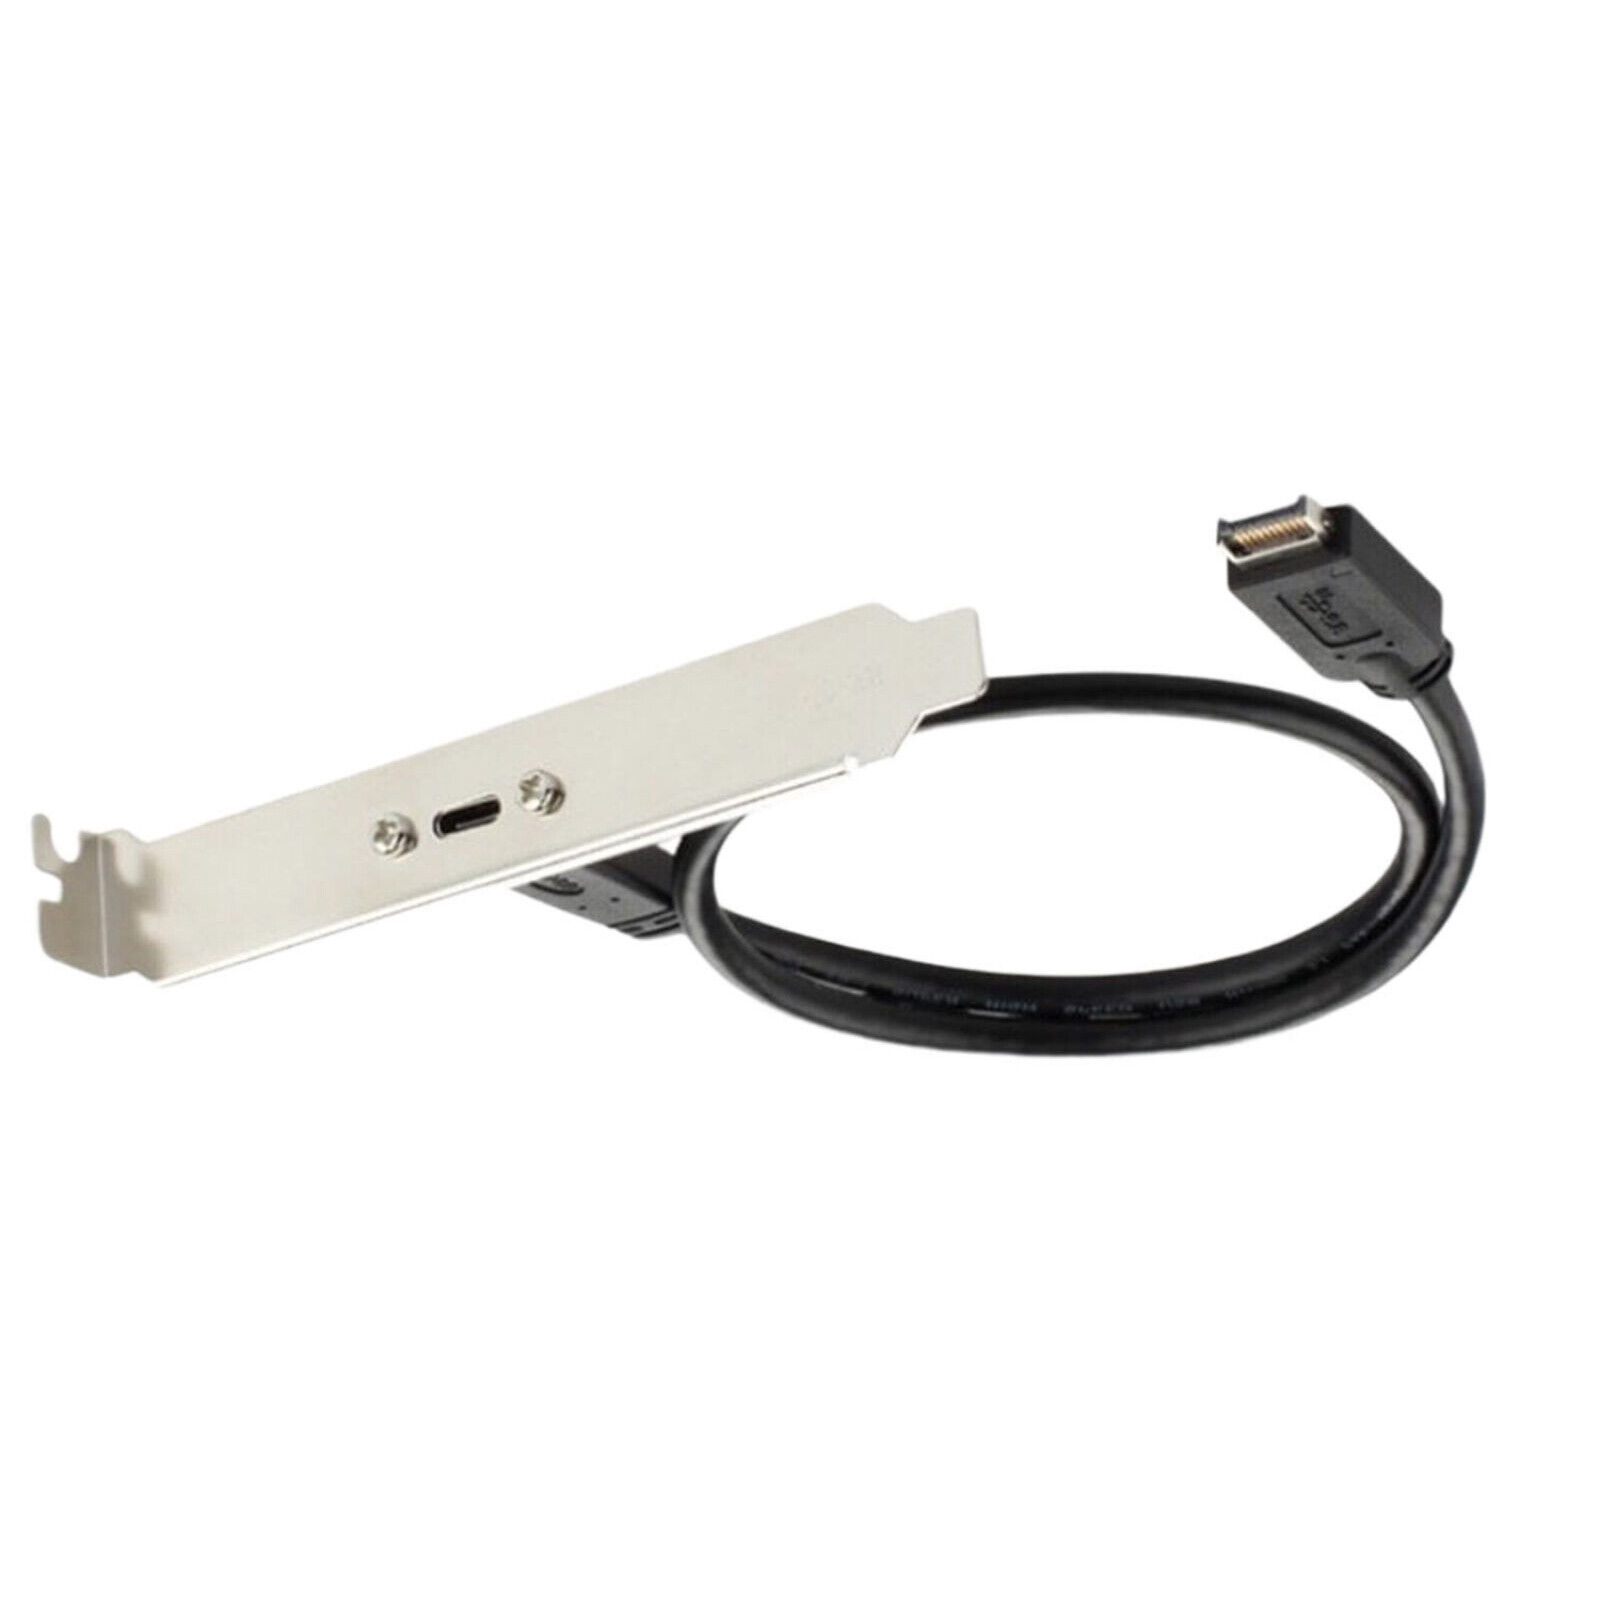 P&P USB 3.1 Type E PCI-E to Type C Female Gen 2 Extension Cable With Bracket B